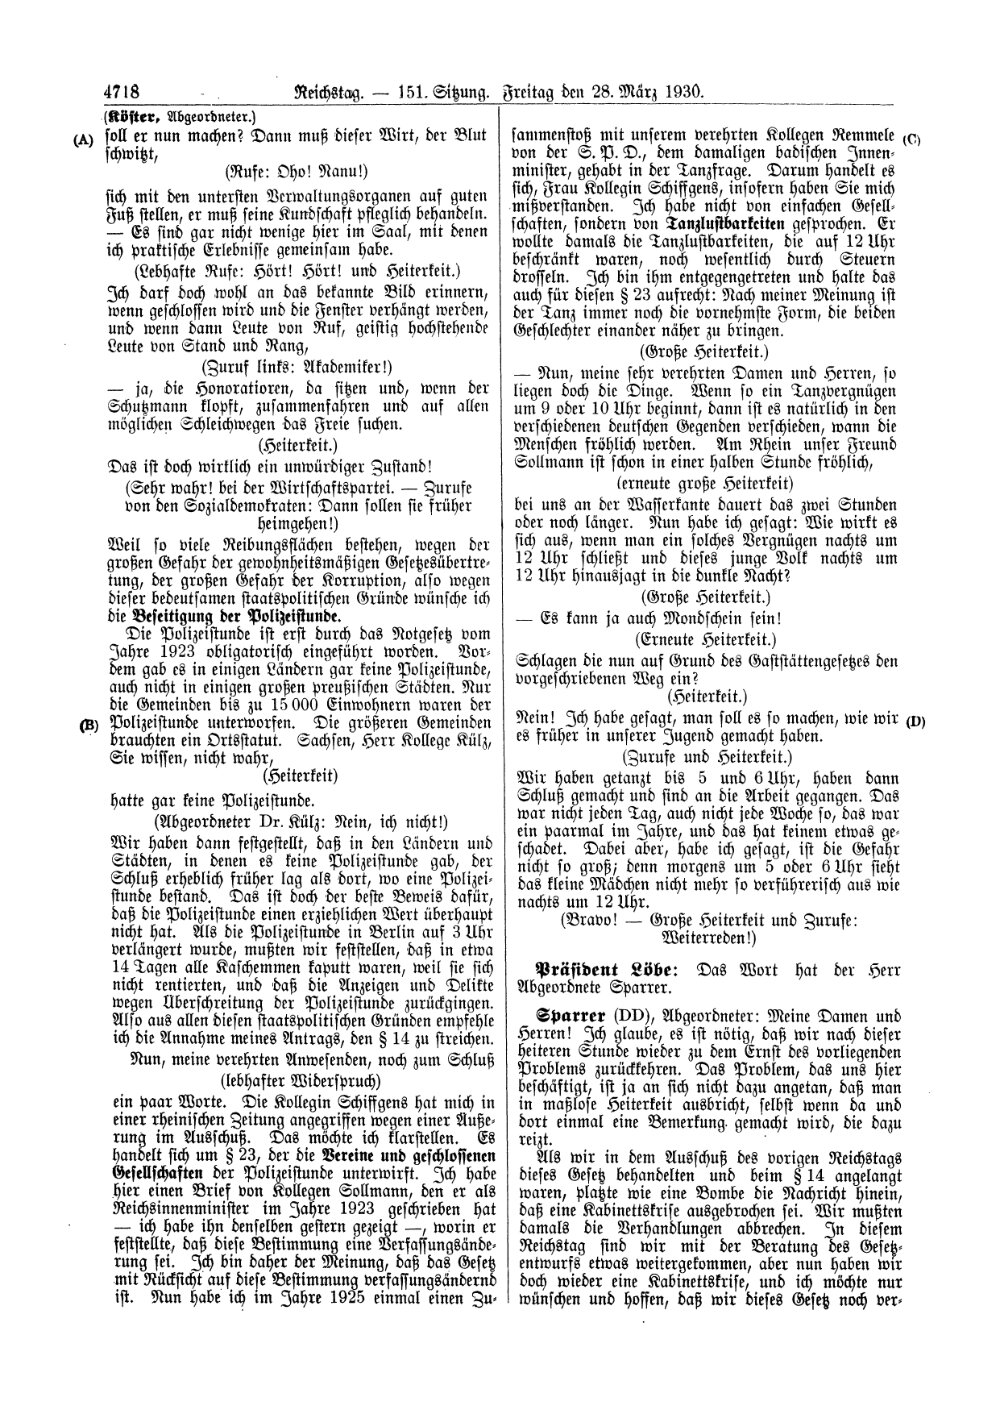 Scan of page 4718